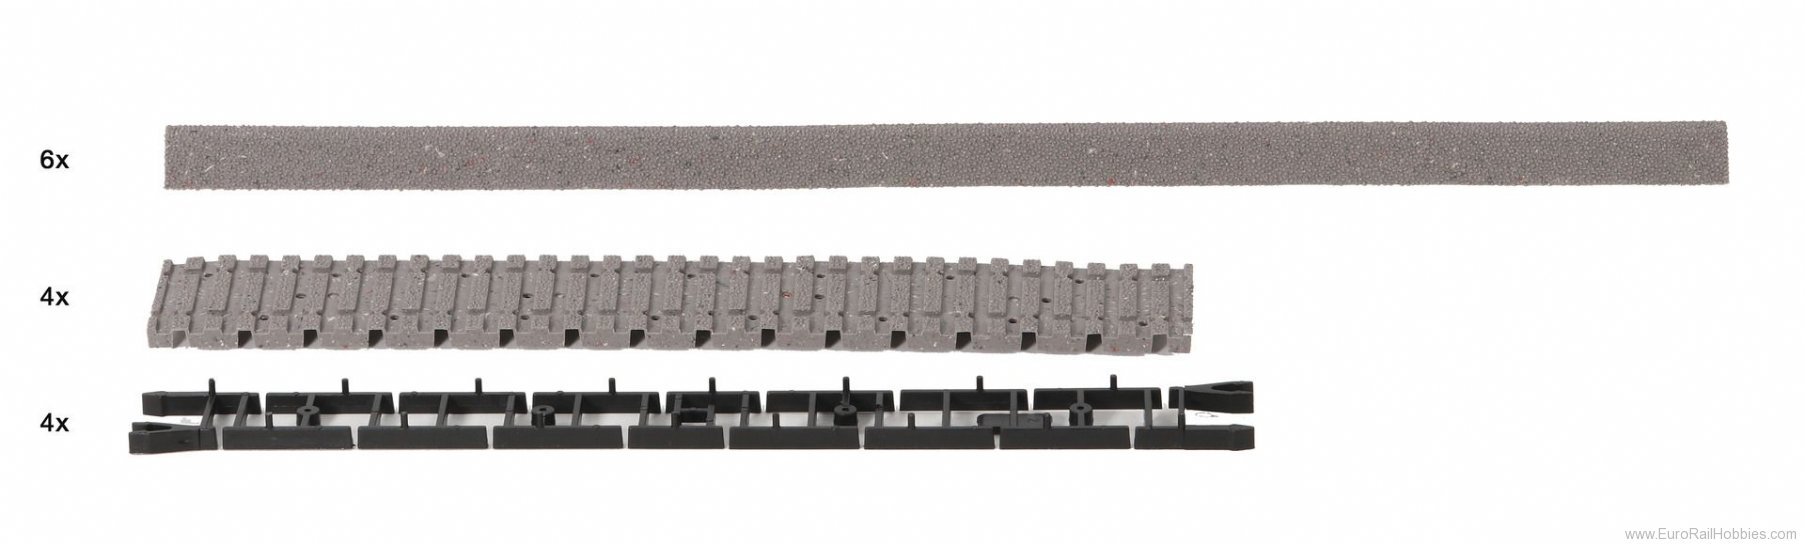 Roco 42661 Track bed  (RocoLine with Track Bed)